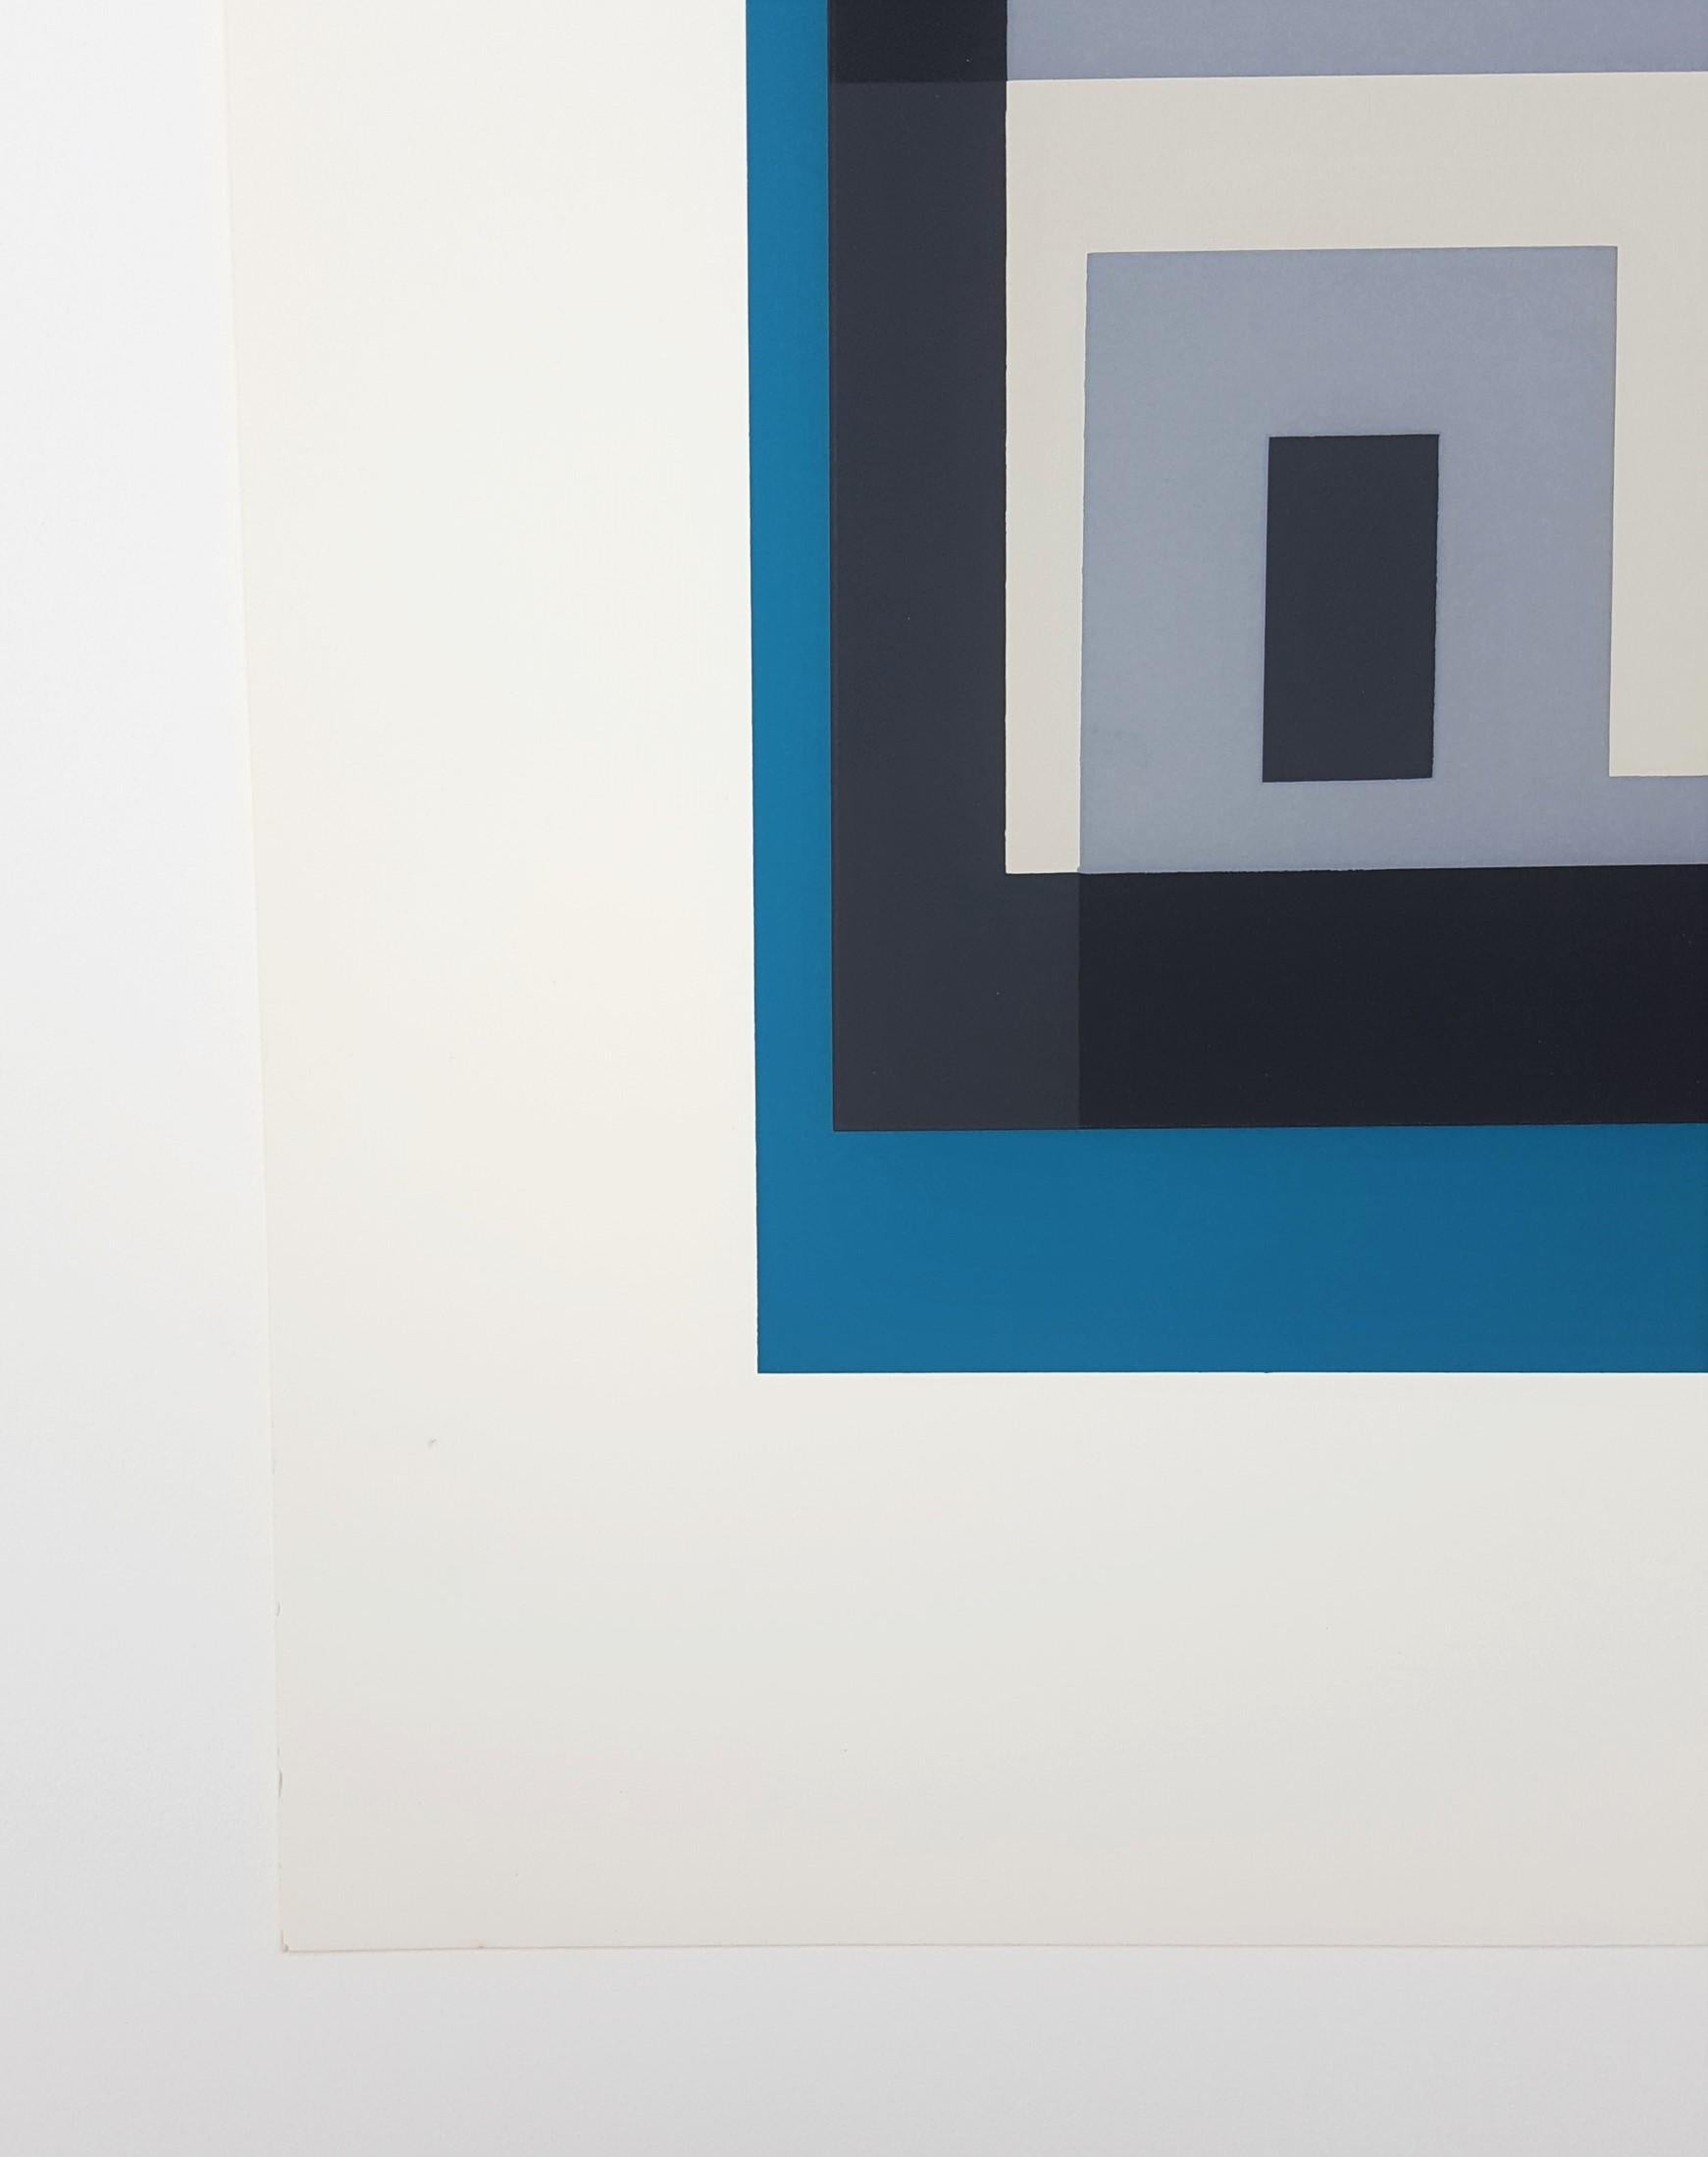 Variant IV - Blue Abstract Print by Josef Albers